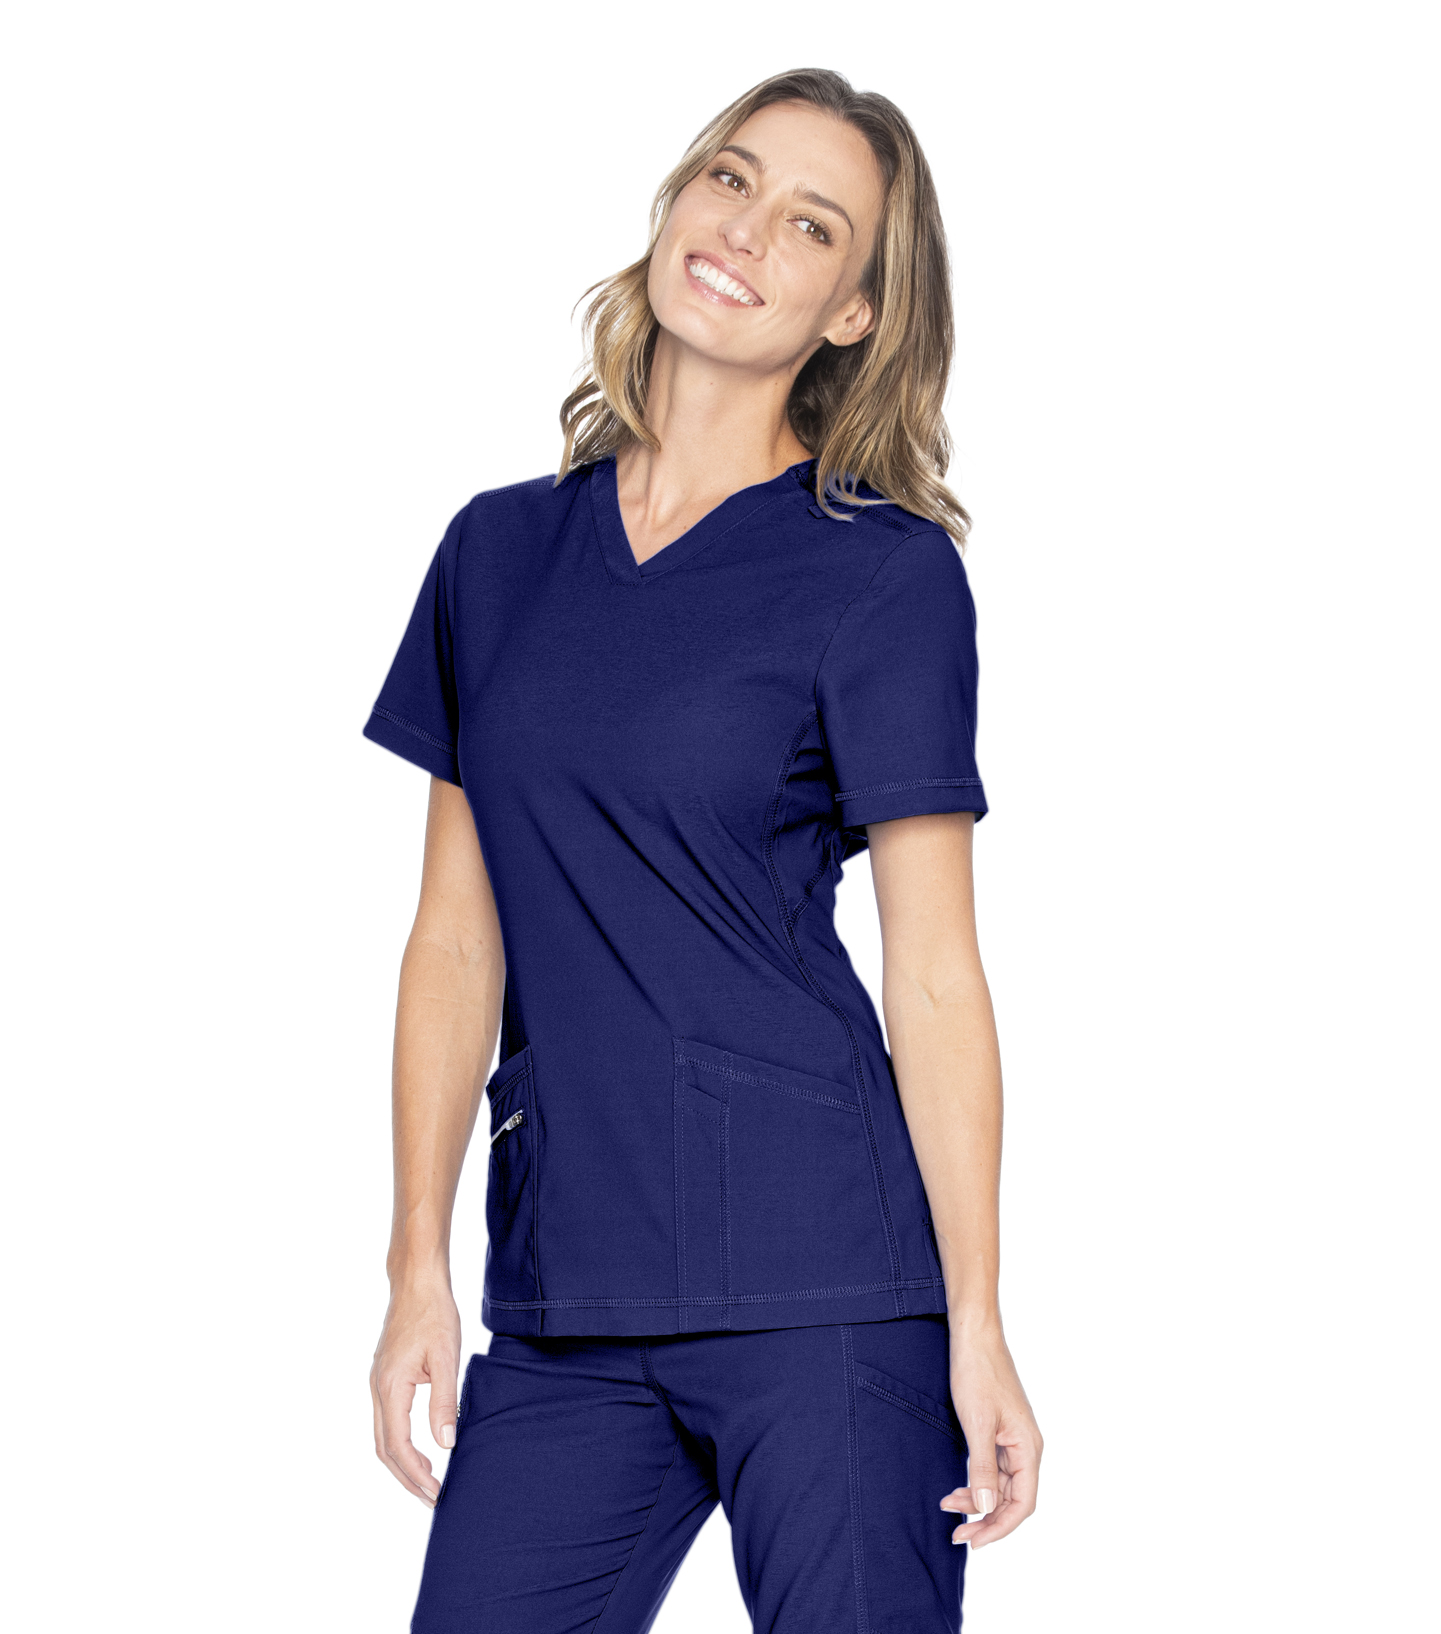 Women's V-Neck With Top Entry PocketS